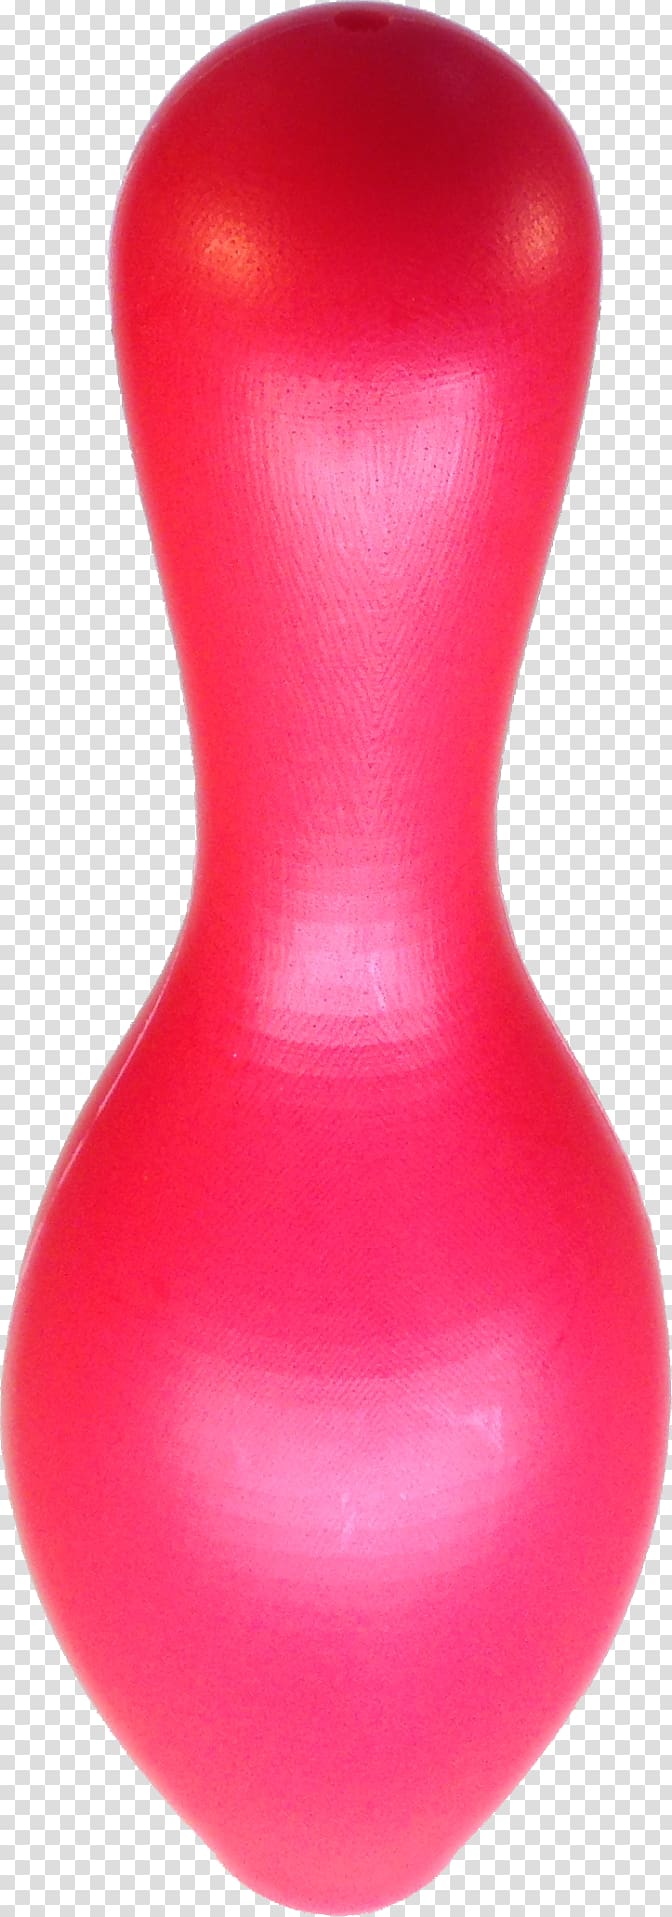 Bowling Pins Description, pink bowling pin water bottle transparent background PNG clipart